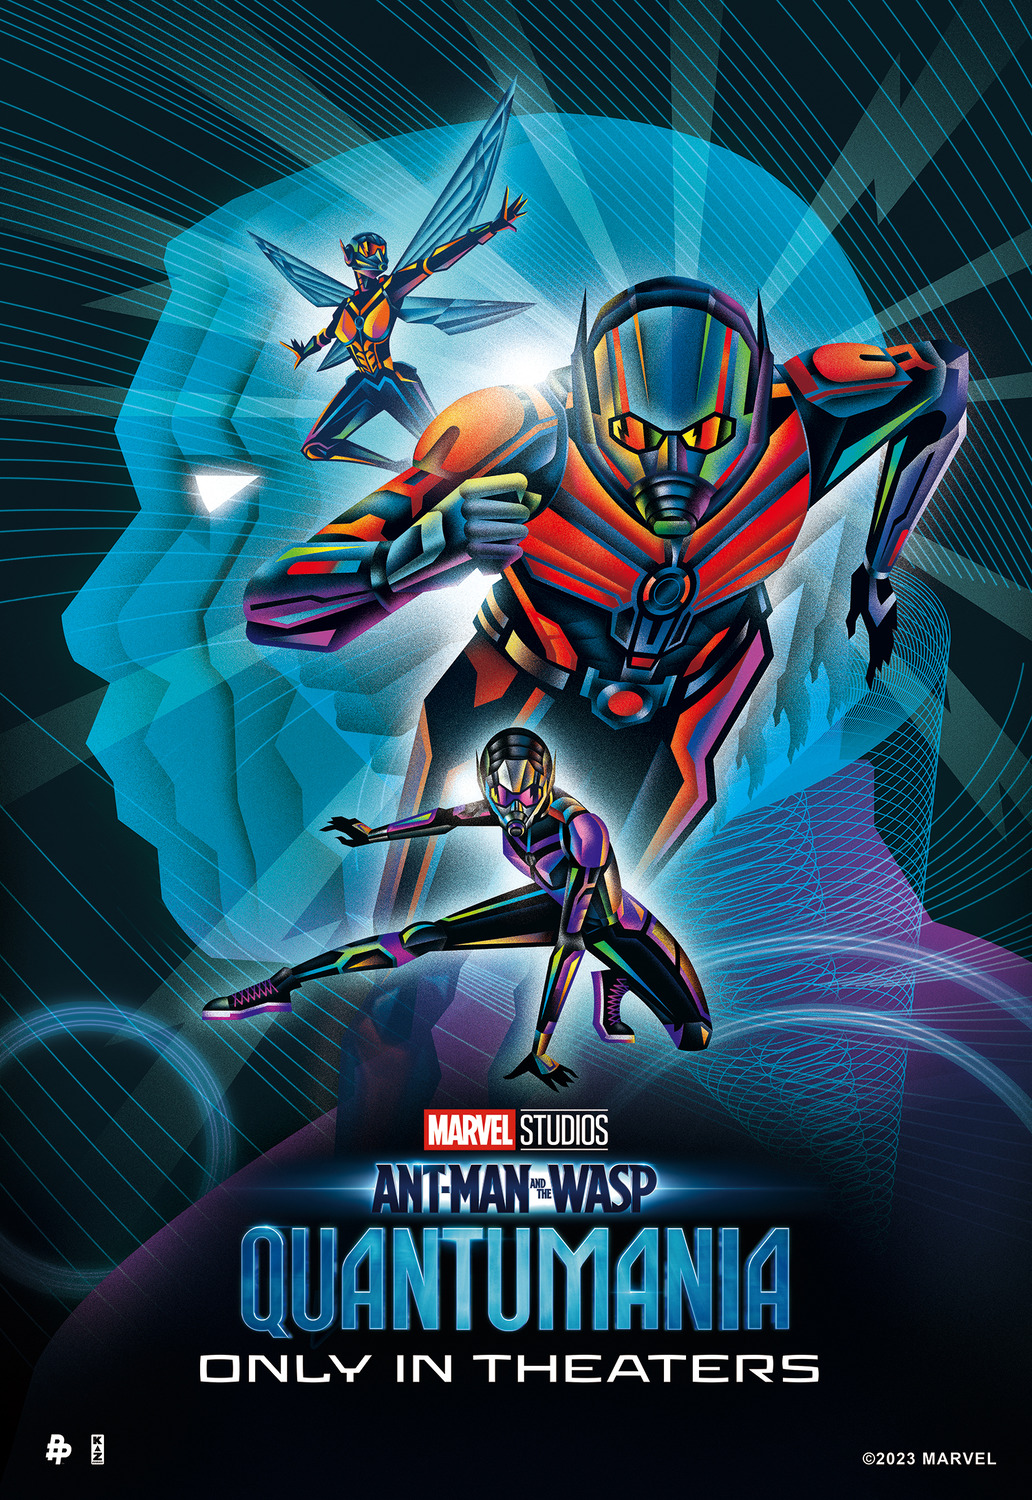 Extra Large Movie Poster Image for Ant-Man and the Wasp: Quantumania (#27 of 27)